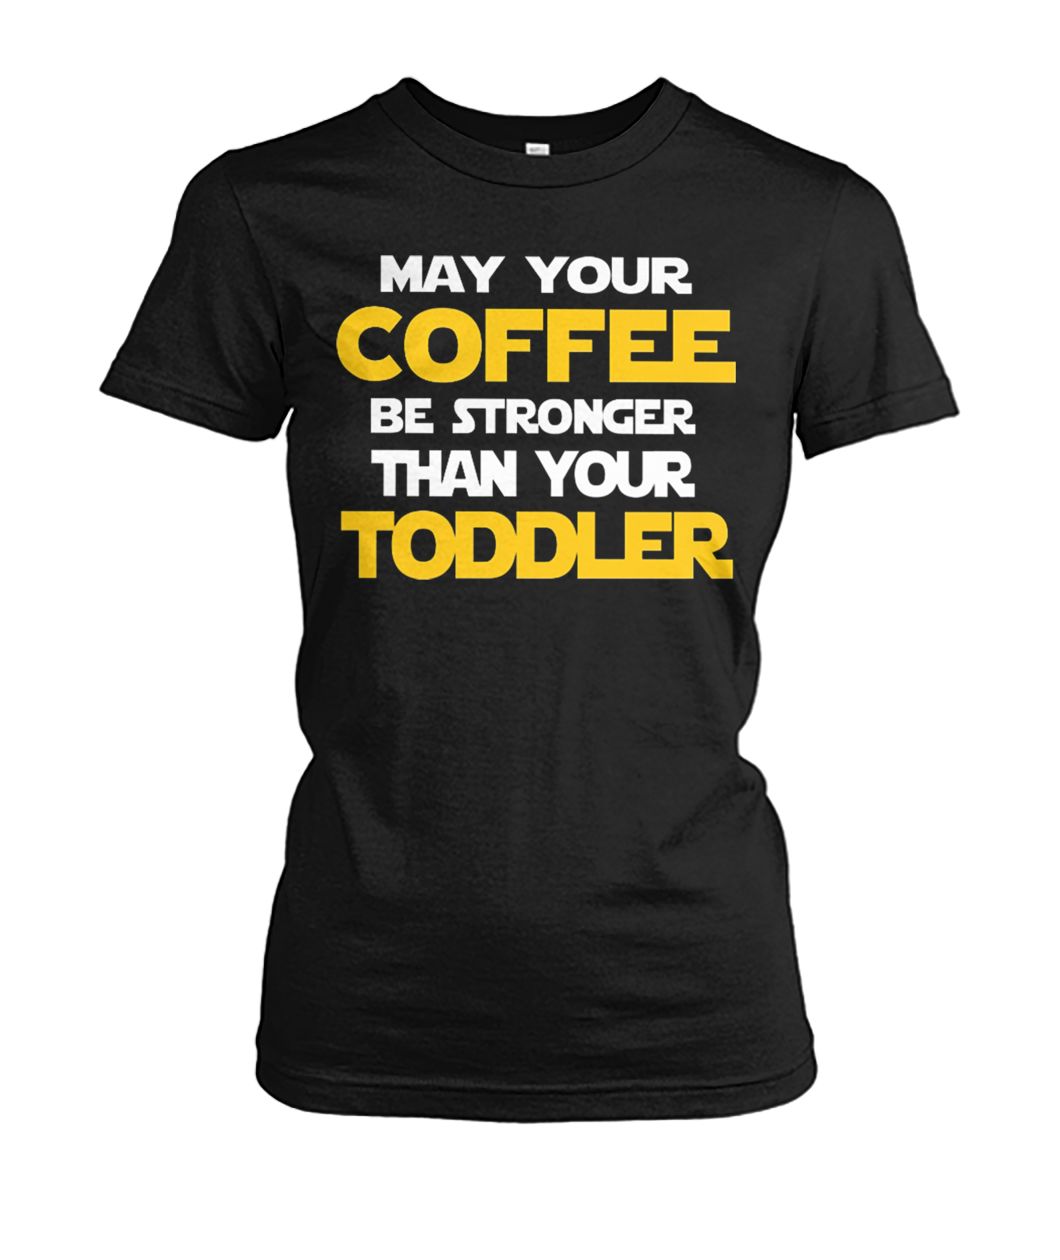 May your coffee be stronger than your toddler women's crew tee